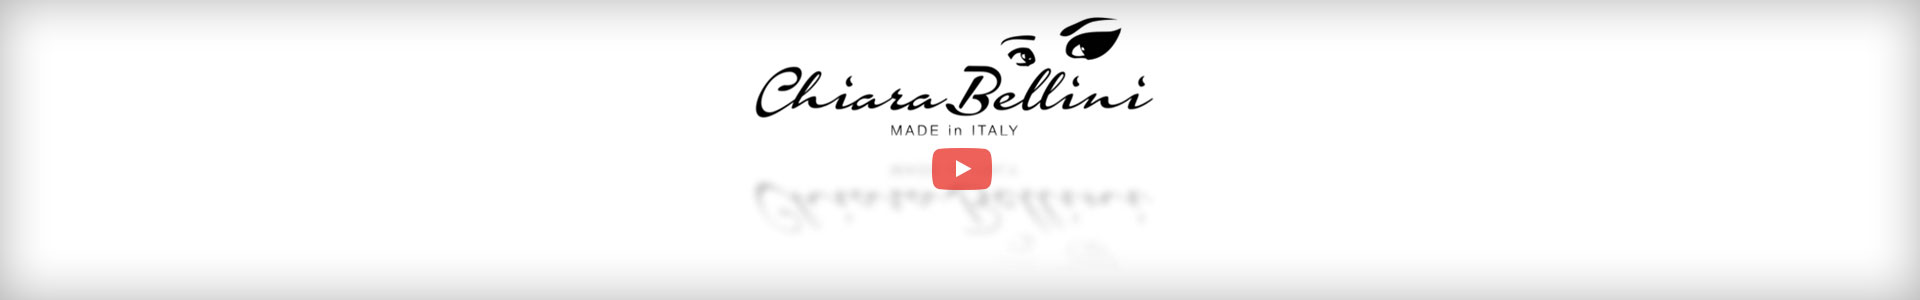 The new corporate video of Chiara Bellini is online